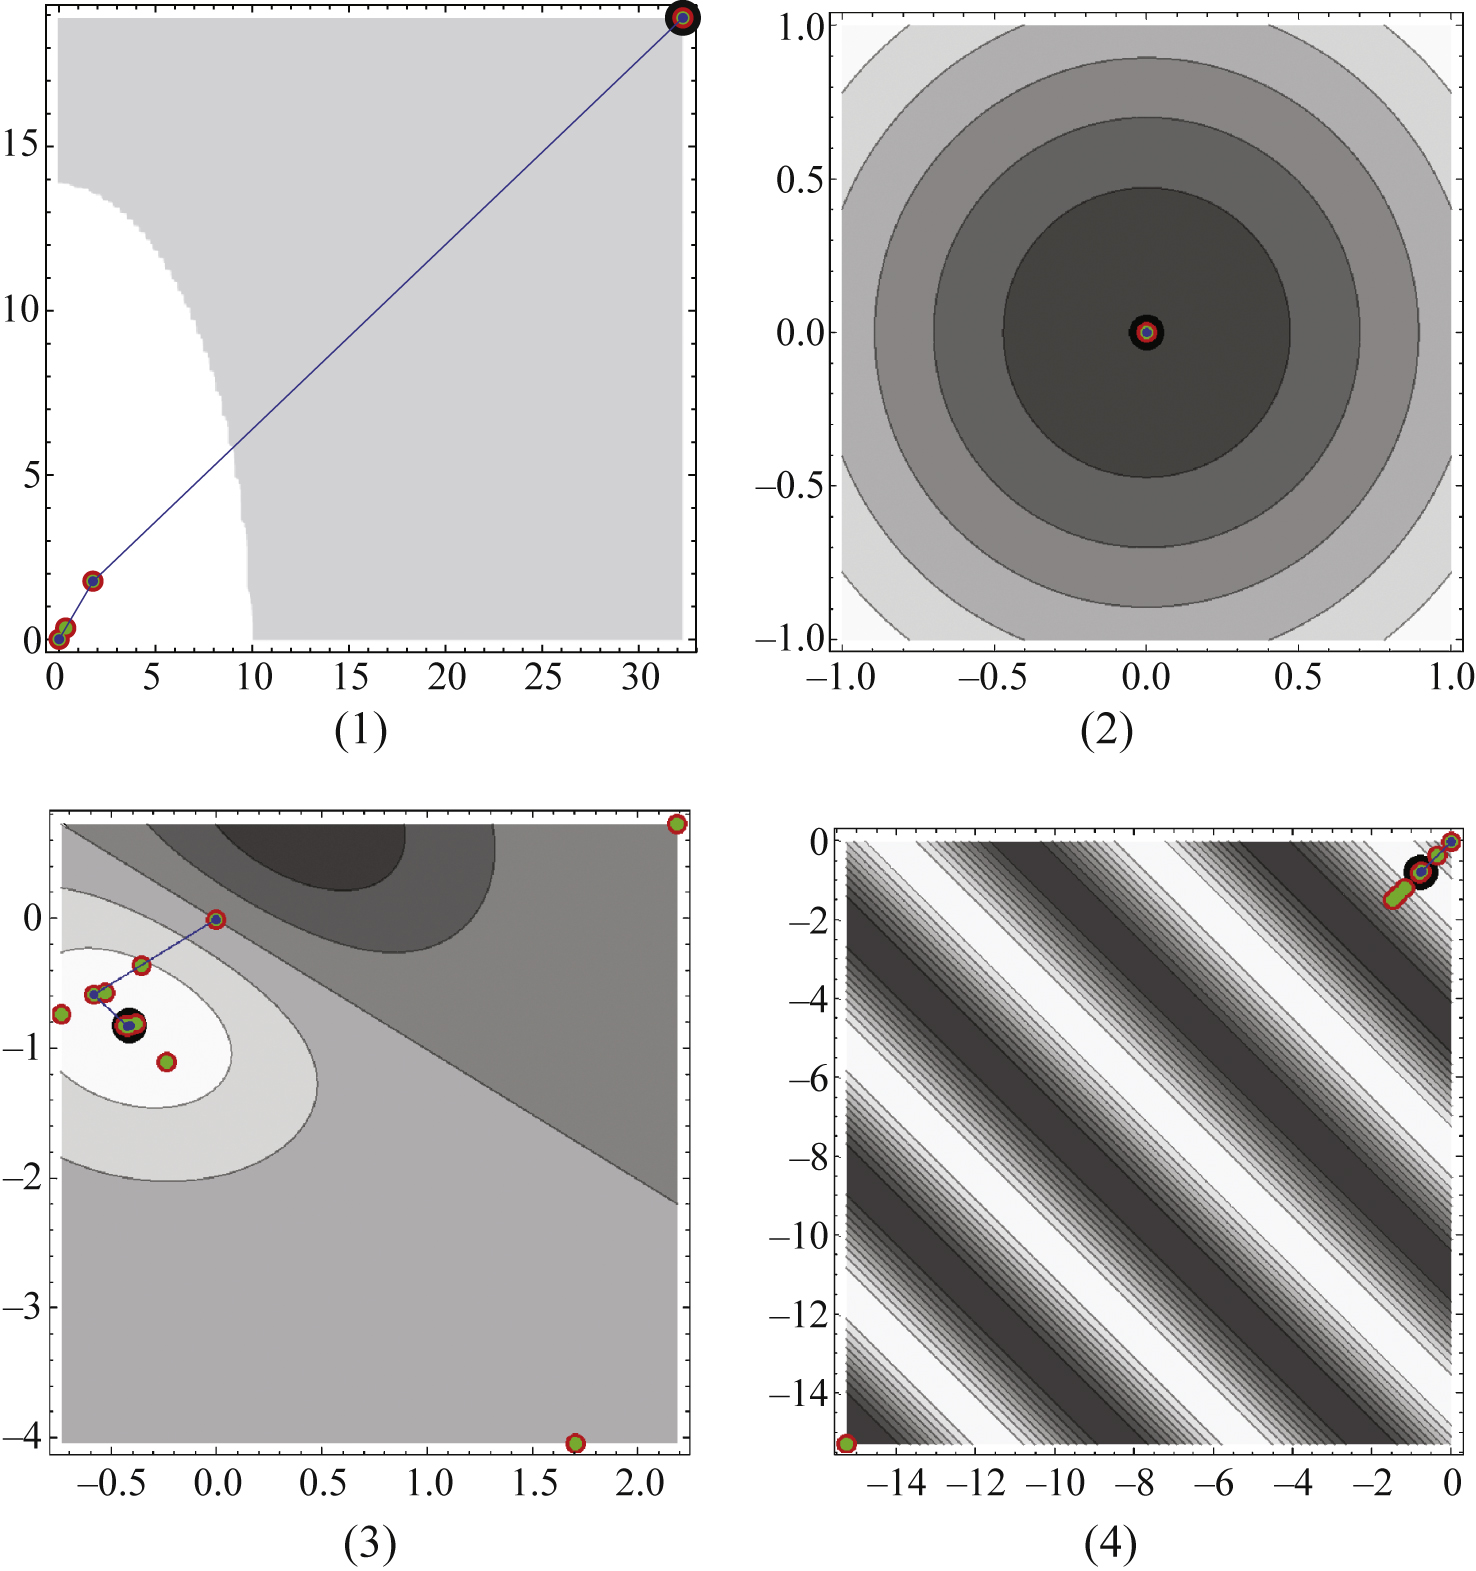 Mamdani model-based fuzzy inference system using nonlinear conjugate gradient for (1) and (2) as compared with a non-Mamdani model (3)-(4).